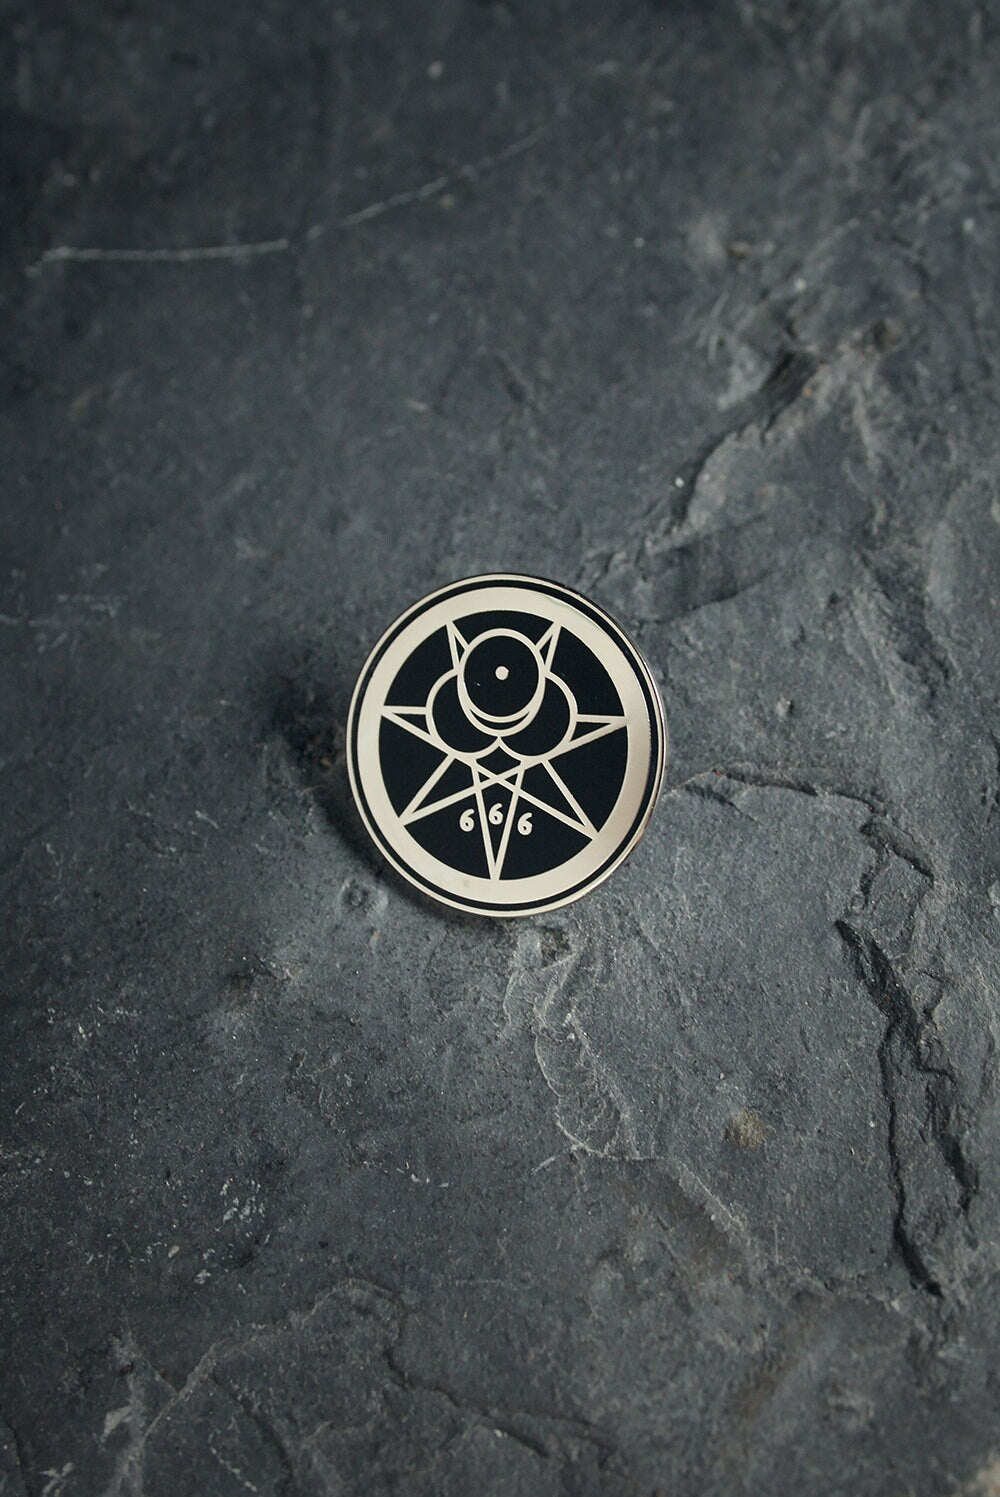 Mark of the Beast, Aleister Crowley - PIN